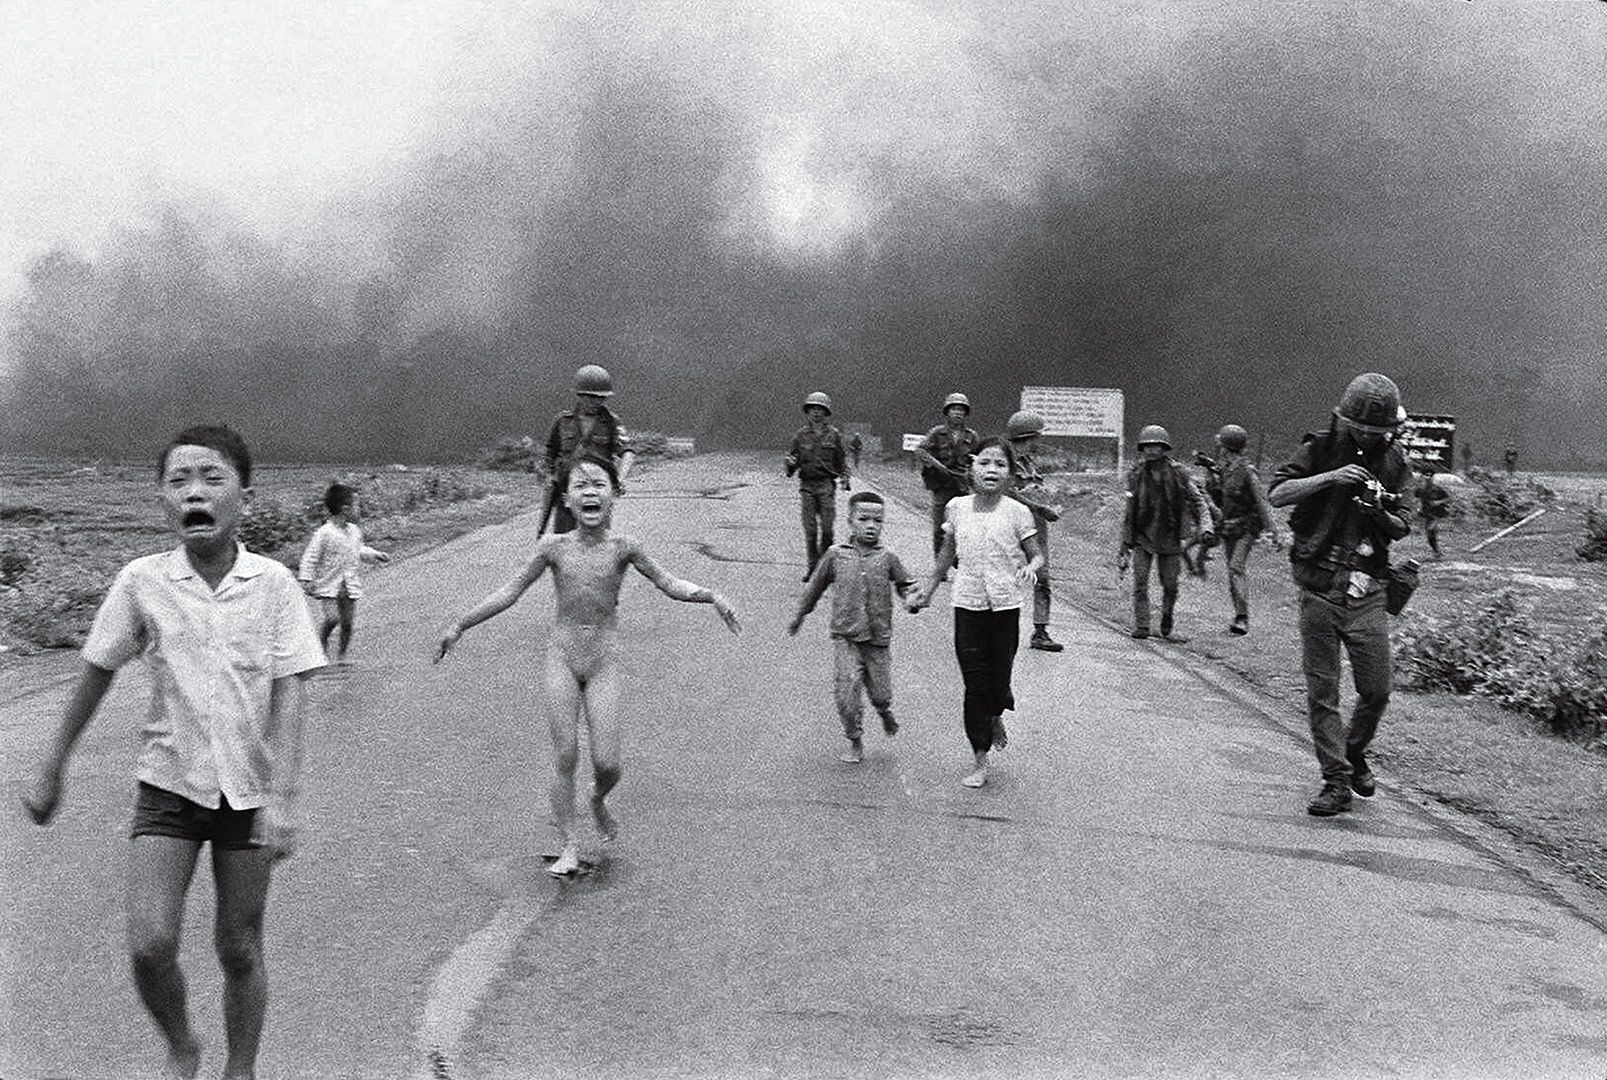 On June 8, 1972, Associated Press photographer Nick Ut was outside Trang Bang, about 25 miles northwest of Saigon, when the South Vietnamese air force mistakenly dropped a load of napalm on the village. 9-year-old Phan Thi Kim Phuc had suffered burns to 30% of her body. Ut’s photo of the raw impact of conflict underscored that the war was doing more harm than good. When President Richard Nixon wondered if the photo was fake, Ut commented, “The horror of the Vietnam War recorded by me did not have to be fixed.” In 1973 the Pulitzer committee agreed and awarded him its prize. That same year, America’s involvement in the war ended.